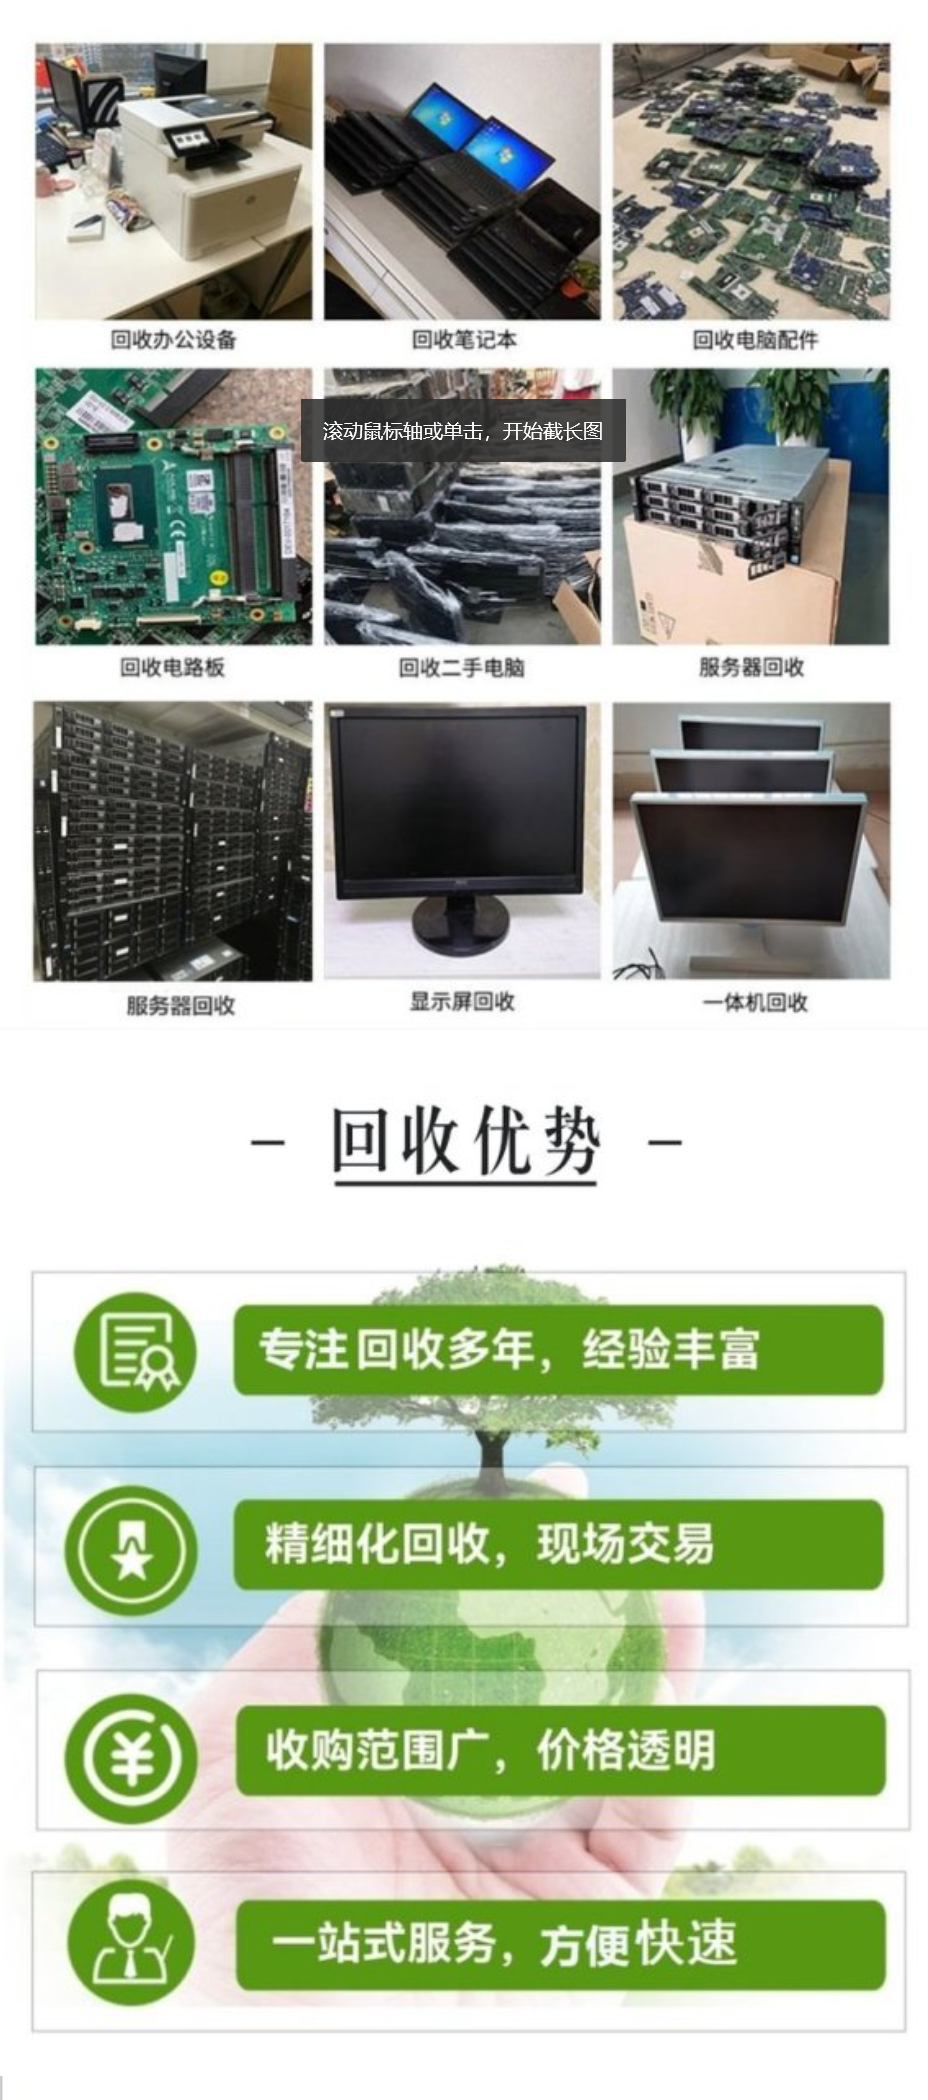 Computer rental, conference and exhibition laptop rental, second-hand all-in-one machine recycling, desktop wholesale